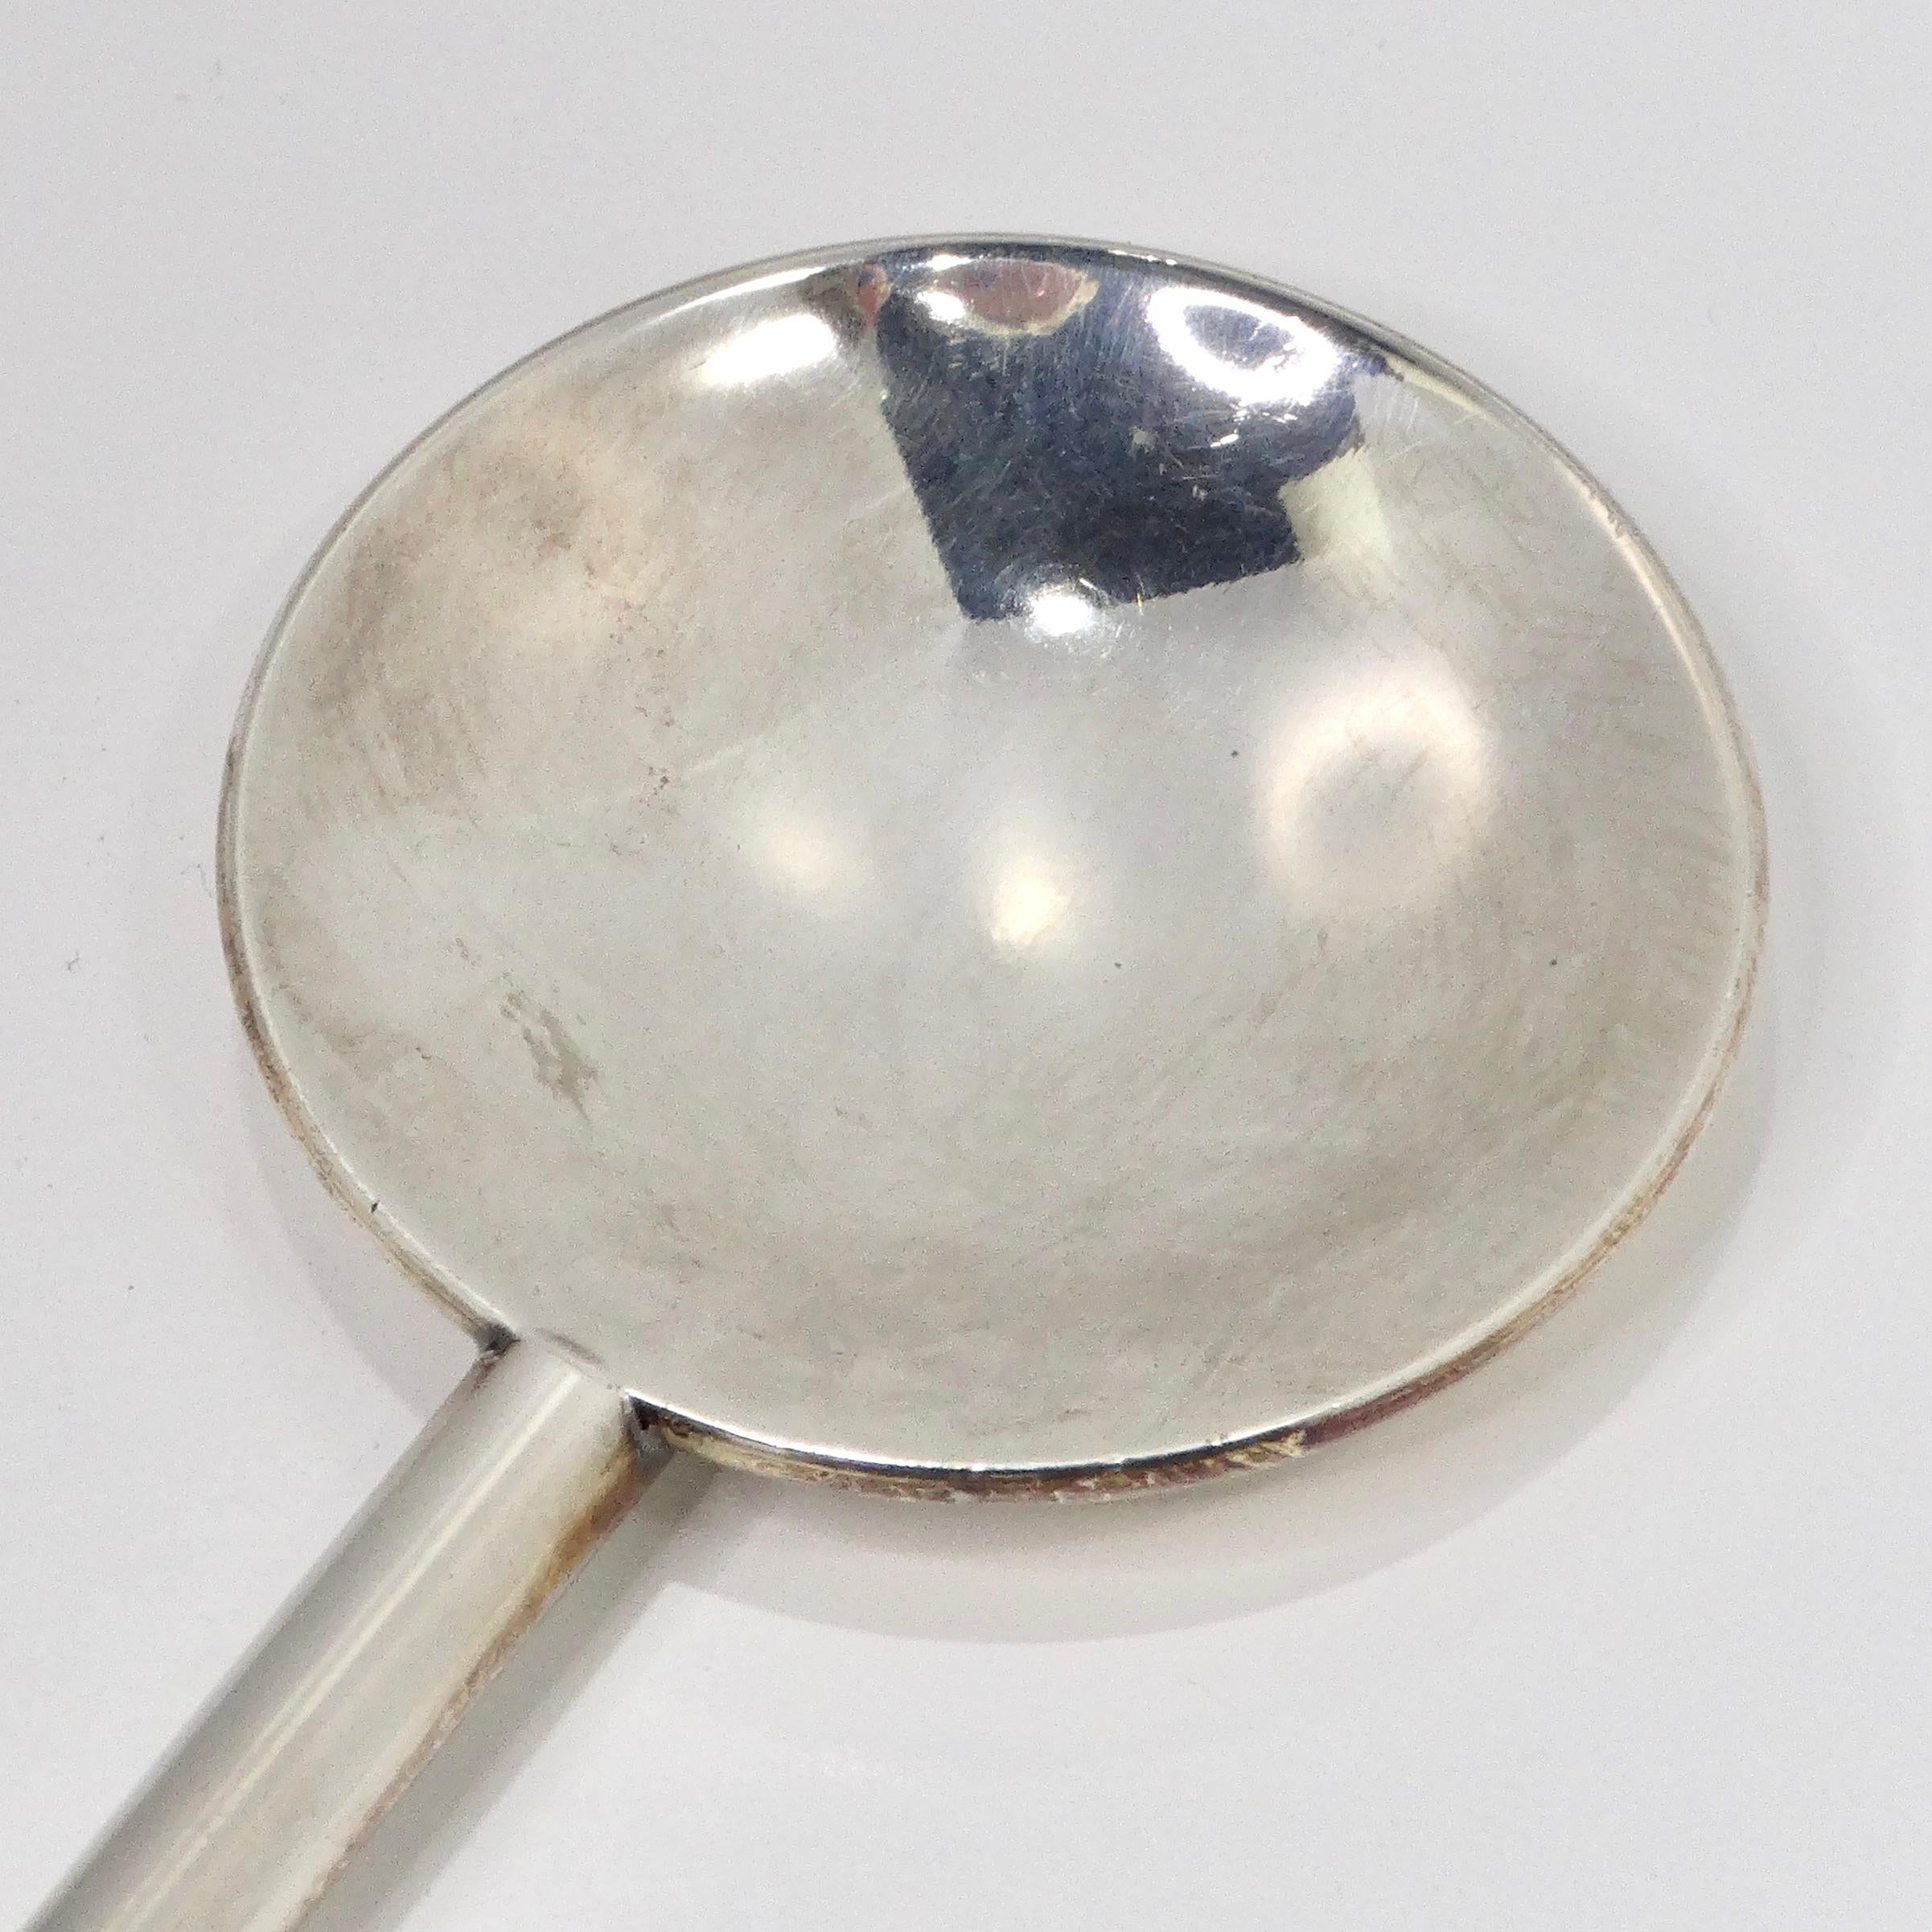 Introducing the Antique Silver Plate Cocktail Spoon, a distinguished piece from the early 1900s that exudes timeless elegance and sophistication.

Crafted with exquisite attention to detail, this silver-plated cocktail spoon is a luxurious addition